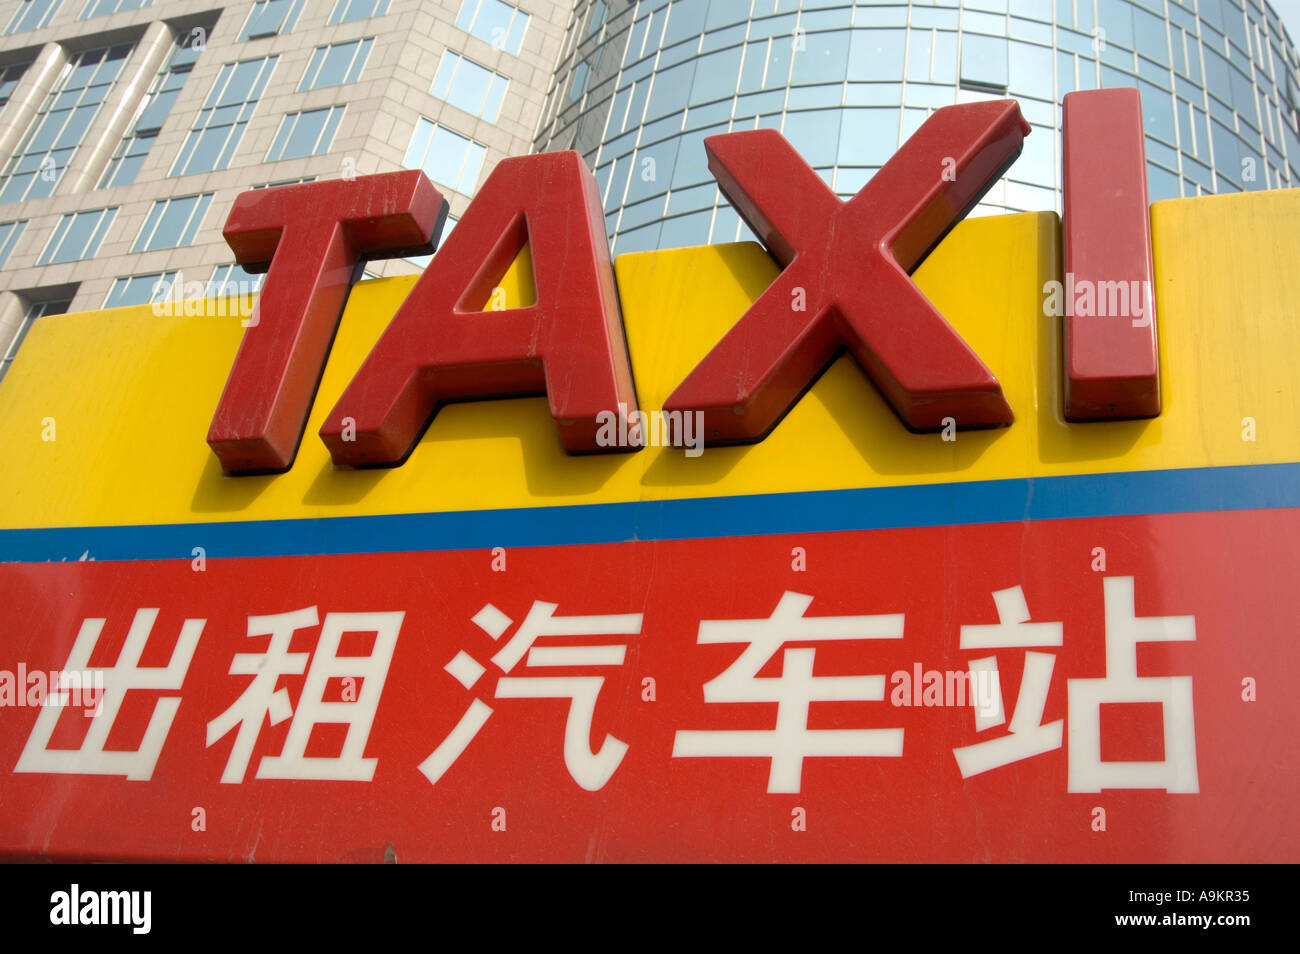 TAXI STAND SIGN IN WANFUJING DAJIE PEDESTRIANISED SHOPPING STREET BEIJING CHINA Stock Photo